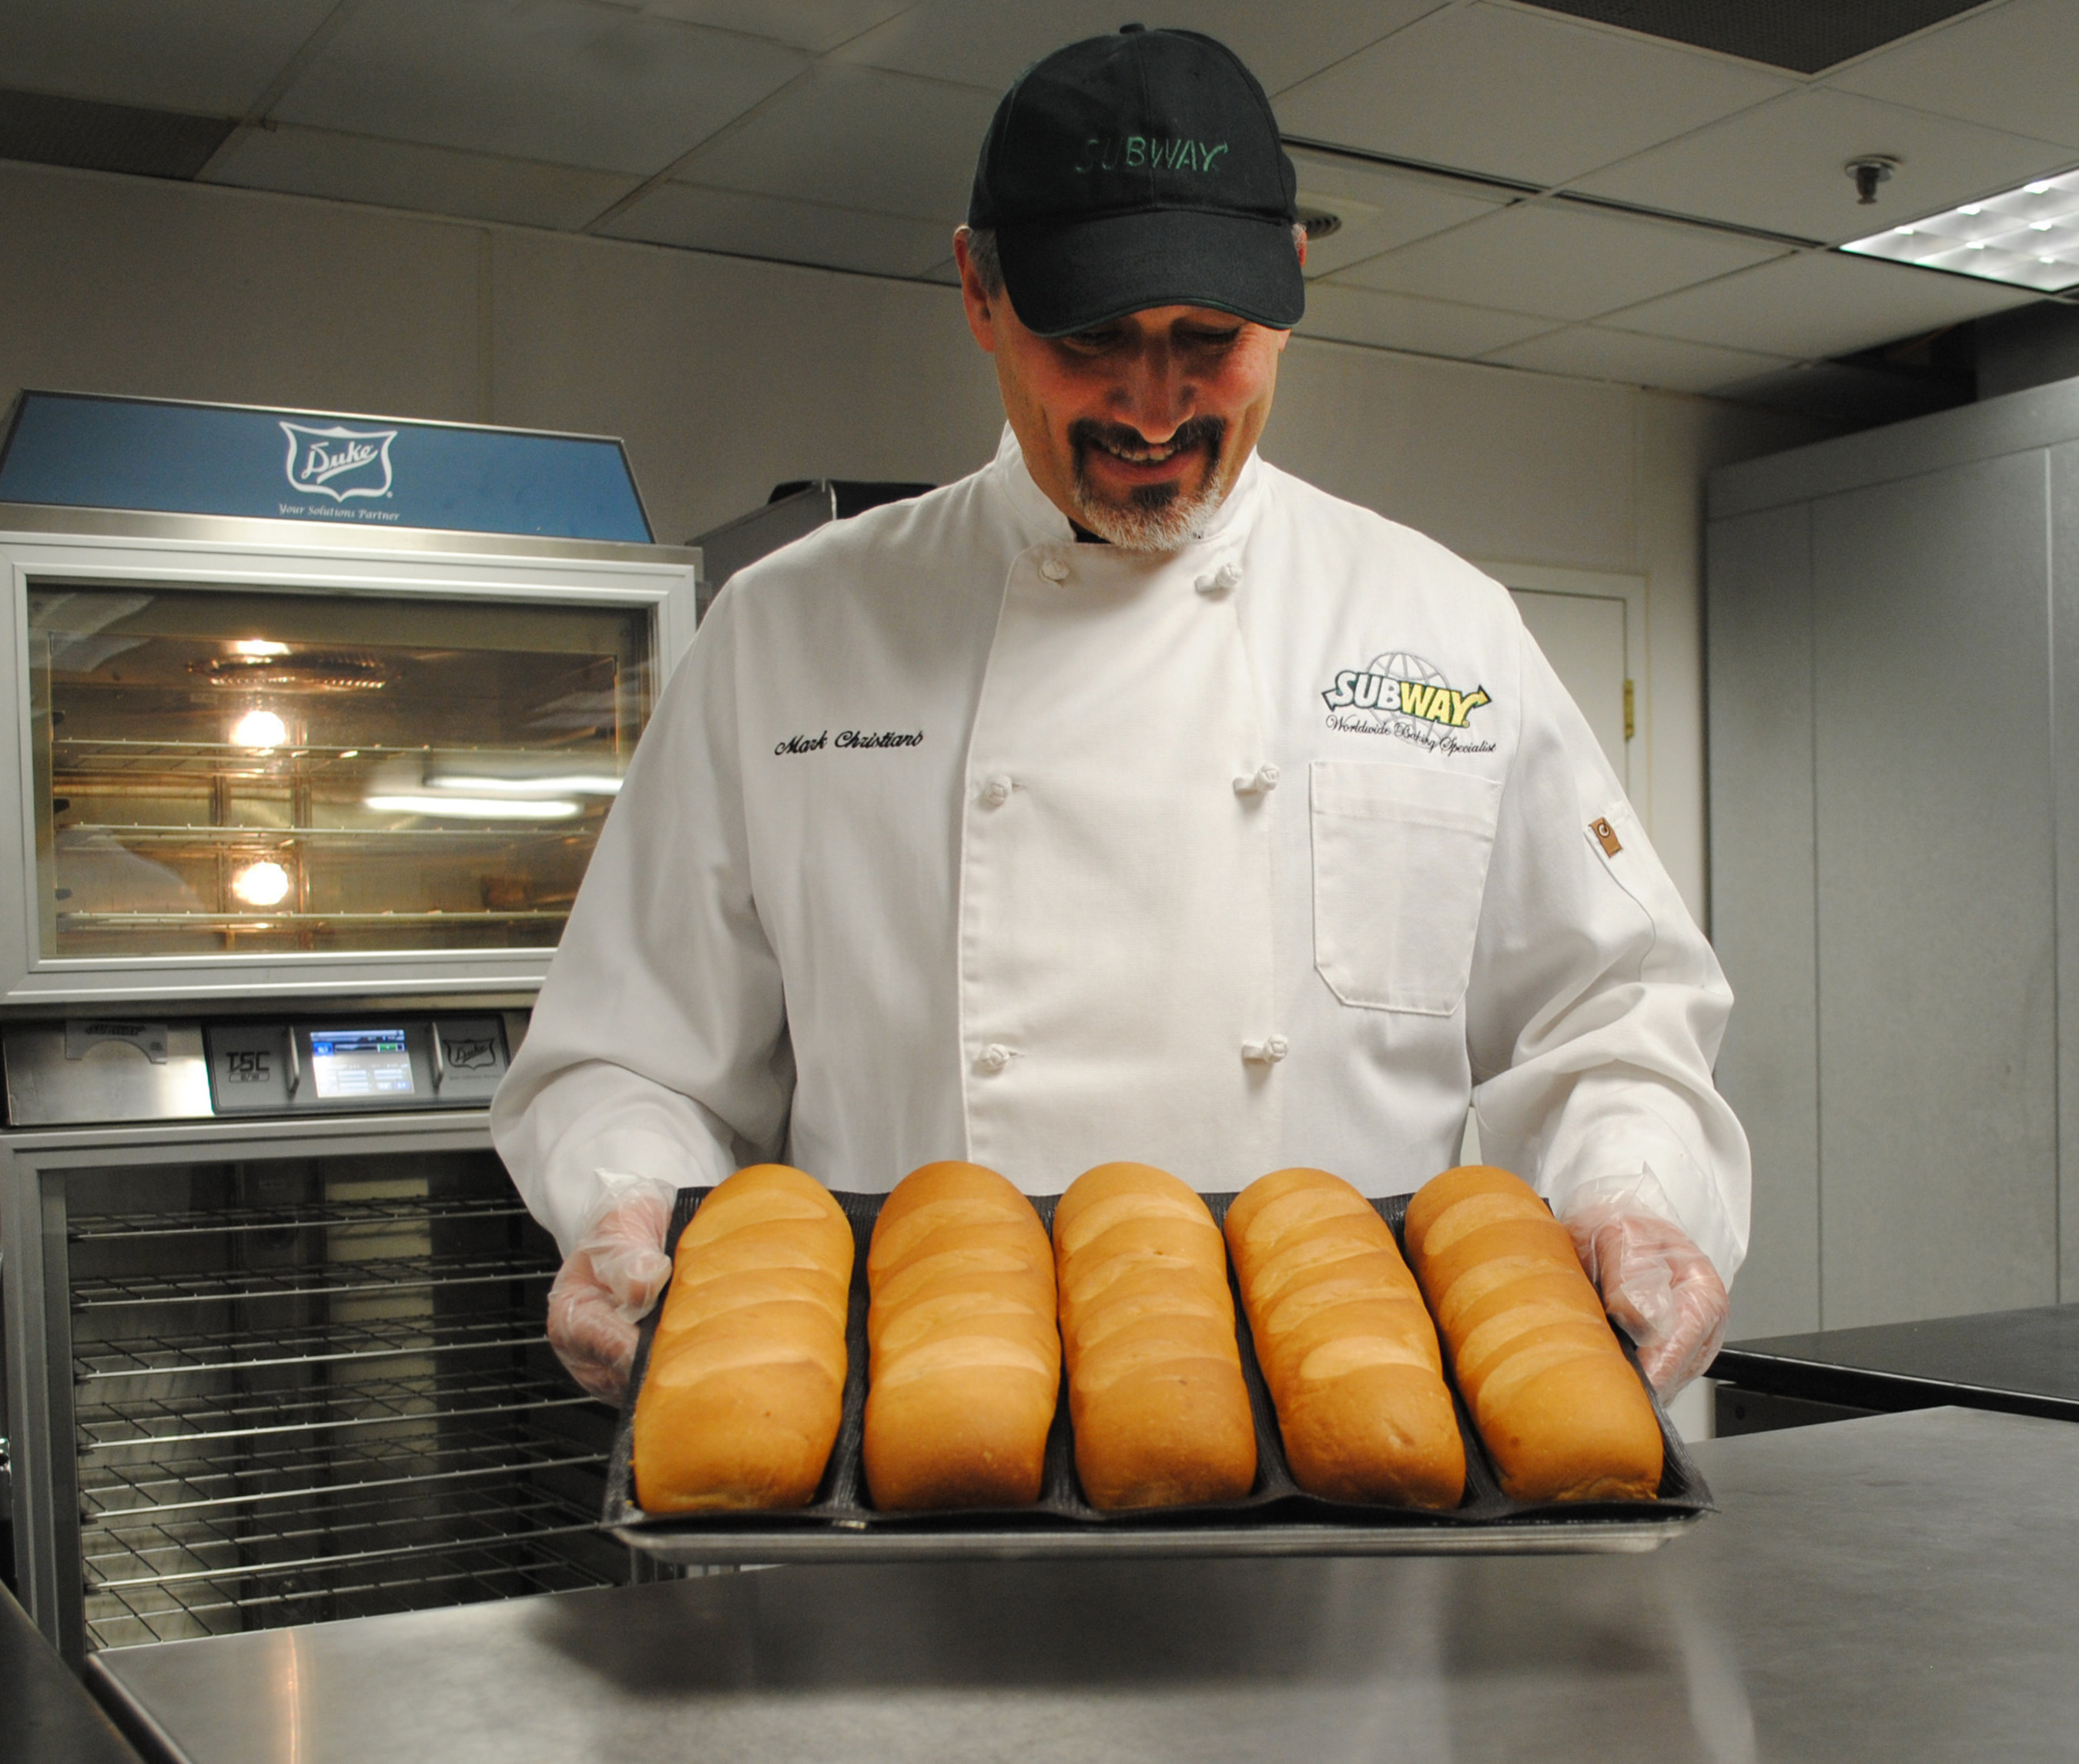 SUBWAY restaurant chain recognizes its bread suppliers for making its bread even better! SUBWAY Baking Specialist Mark Christiano pulls freshly baked bread from the oven.